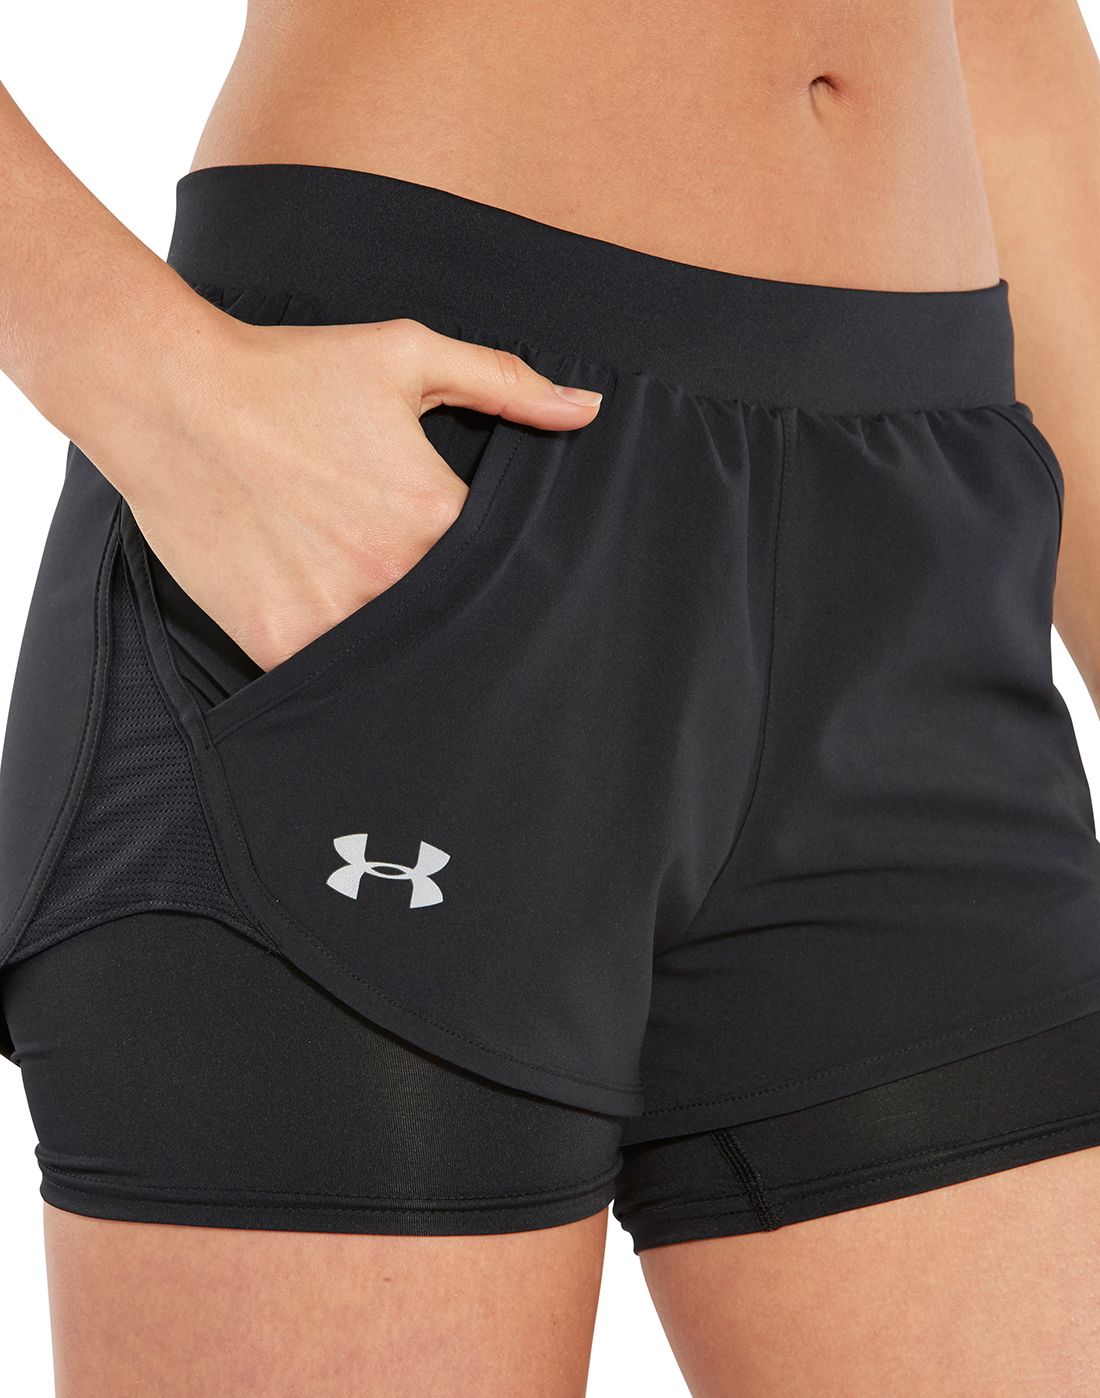 Download Women's Black Under Armour 2 in 1 Shorts | Life Style Sports